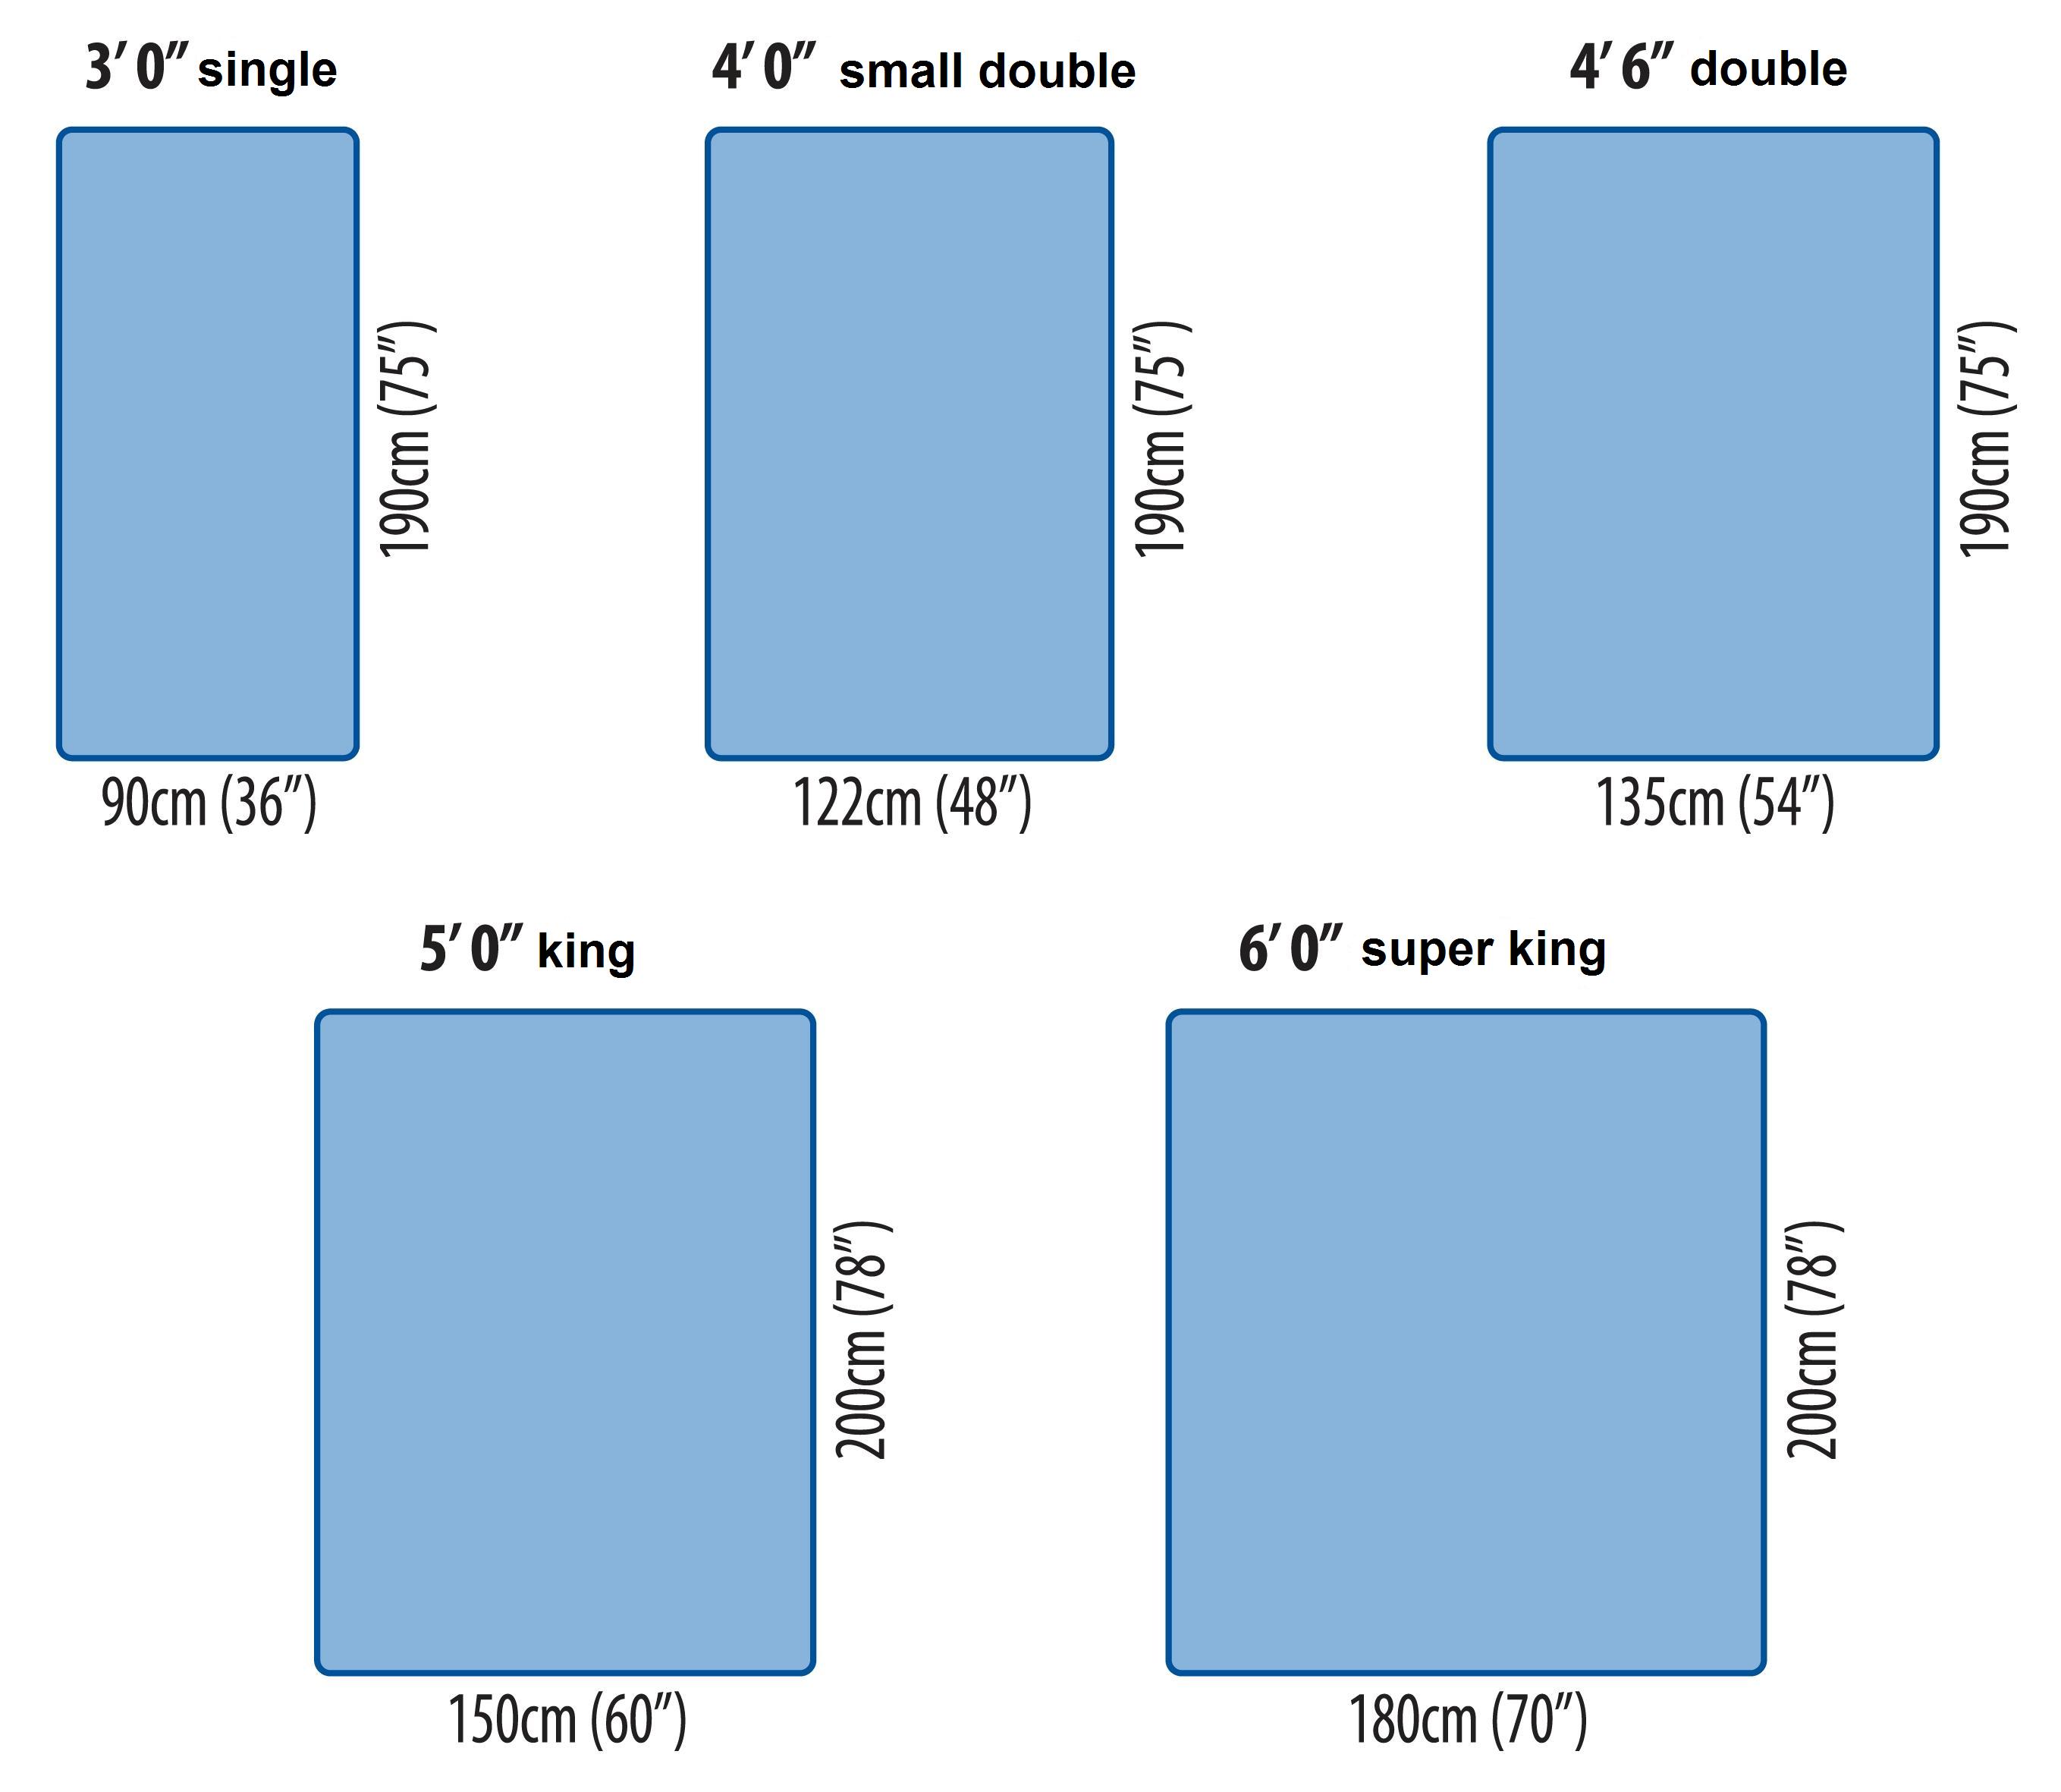 Standard Bed Sizes